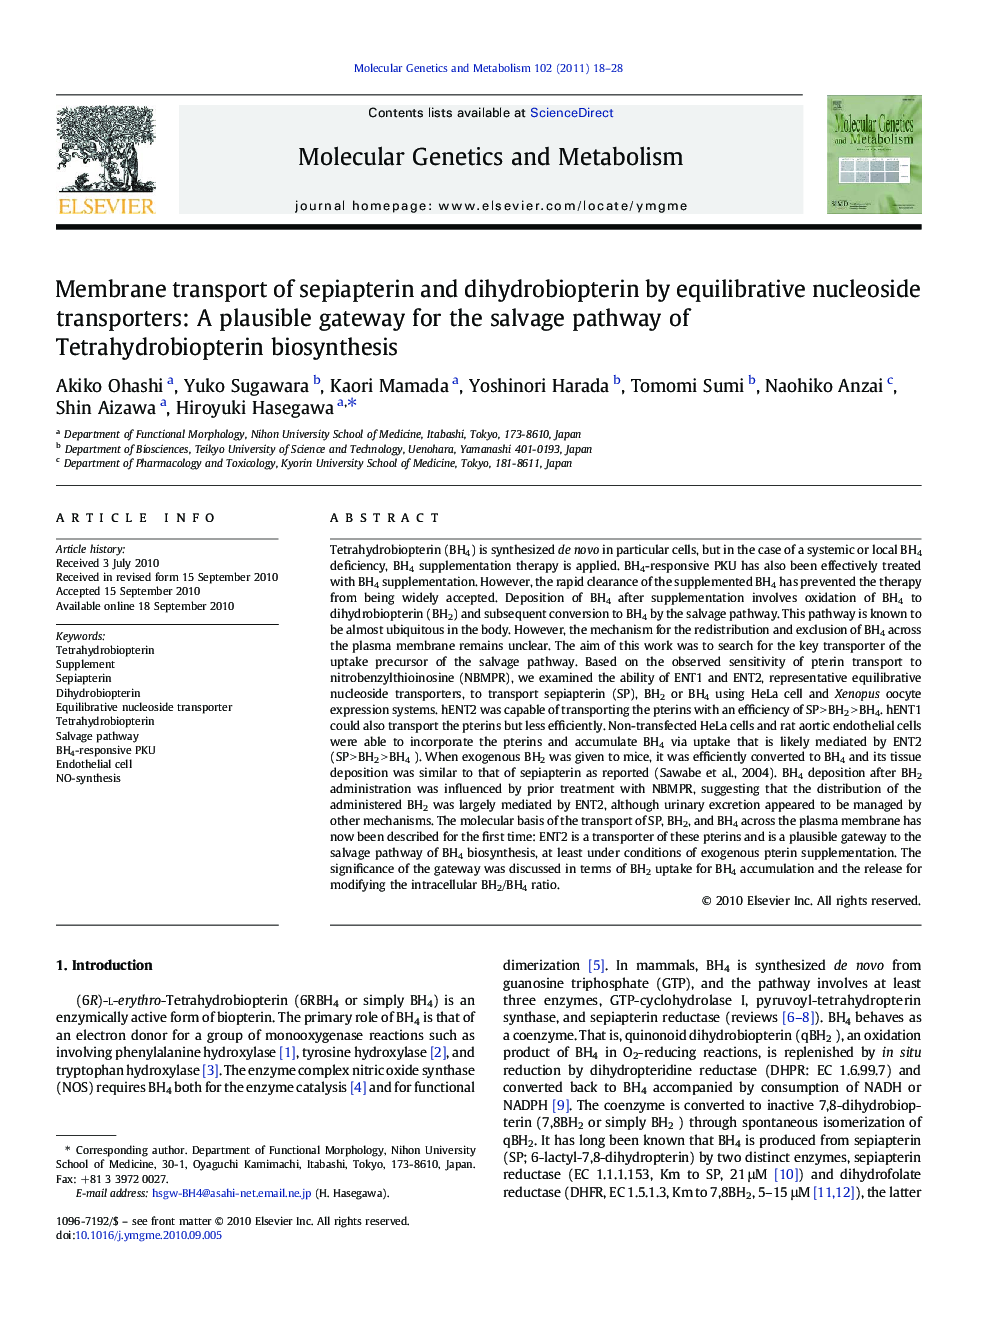 Membrane transport of sepiapterin and dihydrobiopterin by equilibrative nucleoside transporters: A plausible gateway for the salvage pathway of Tetrahydrobiopterin biosynthesis